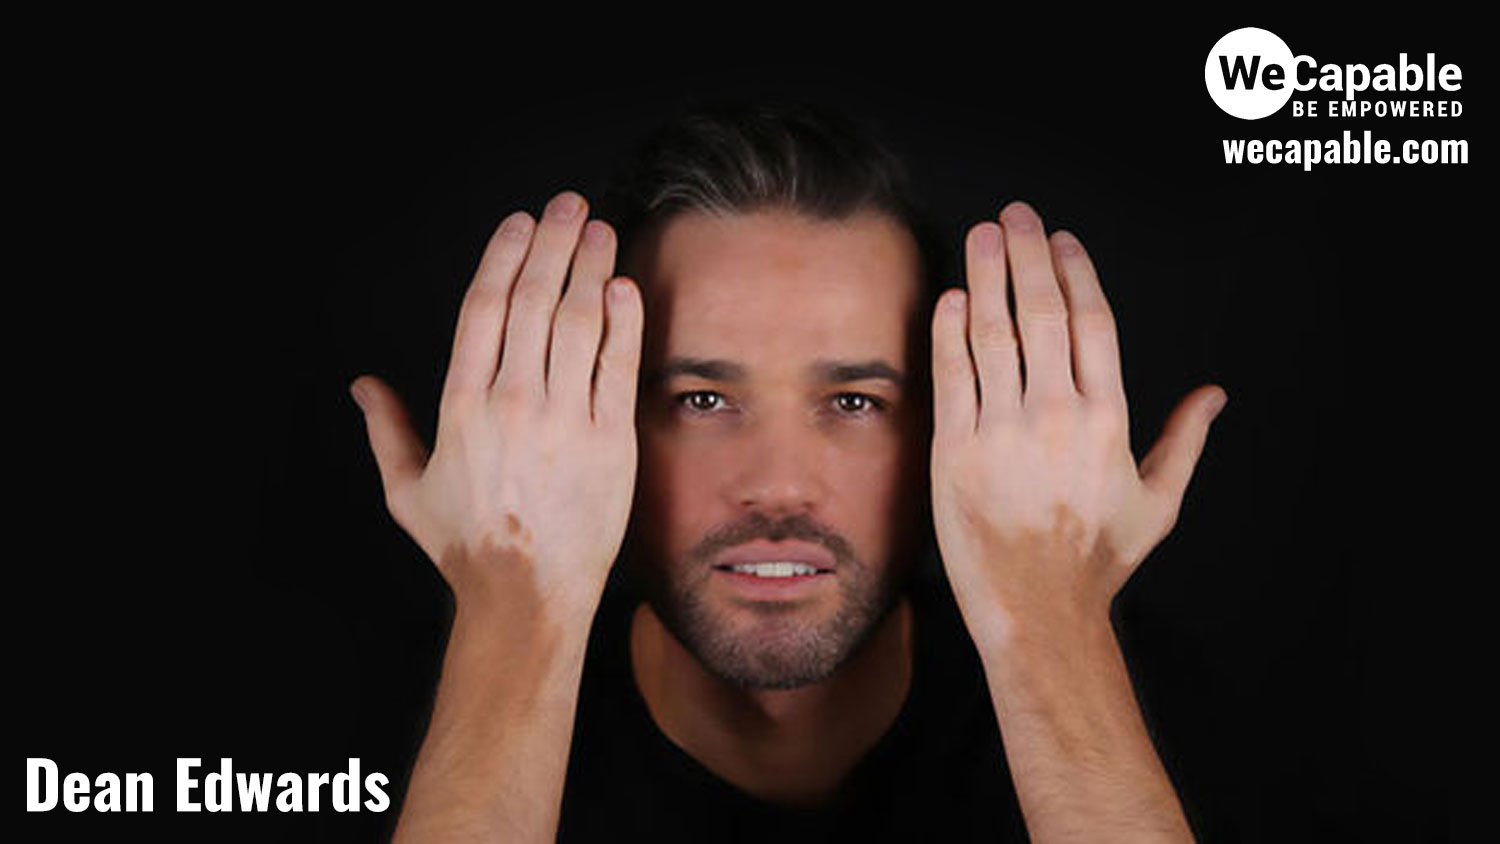 Photograph of Dean Edwards showing his hands with vitiligo patches